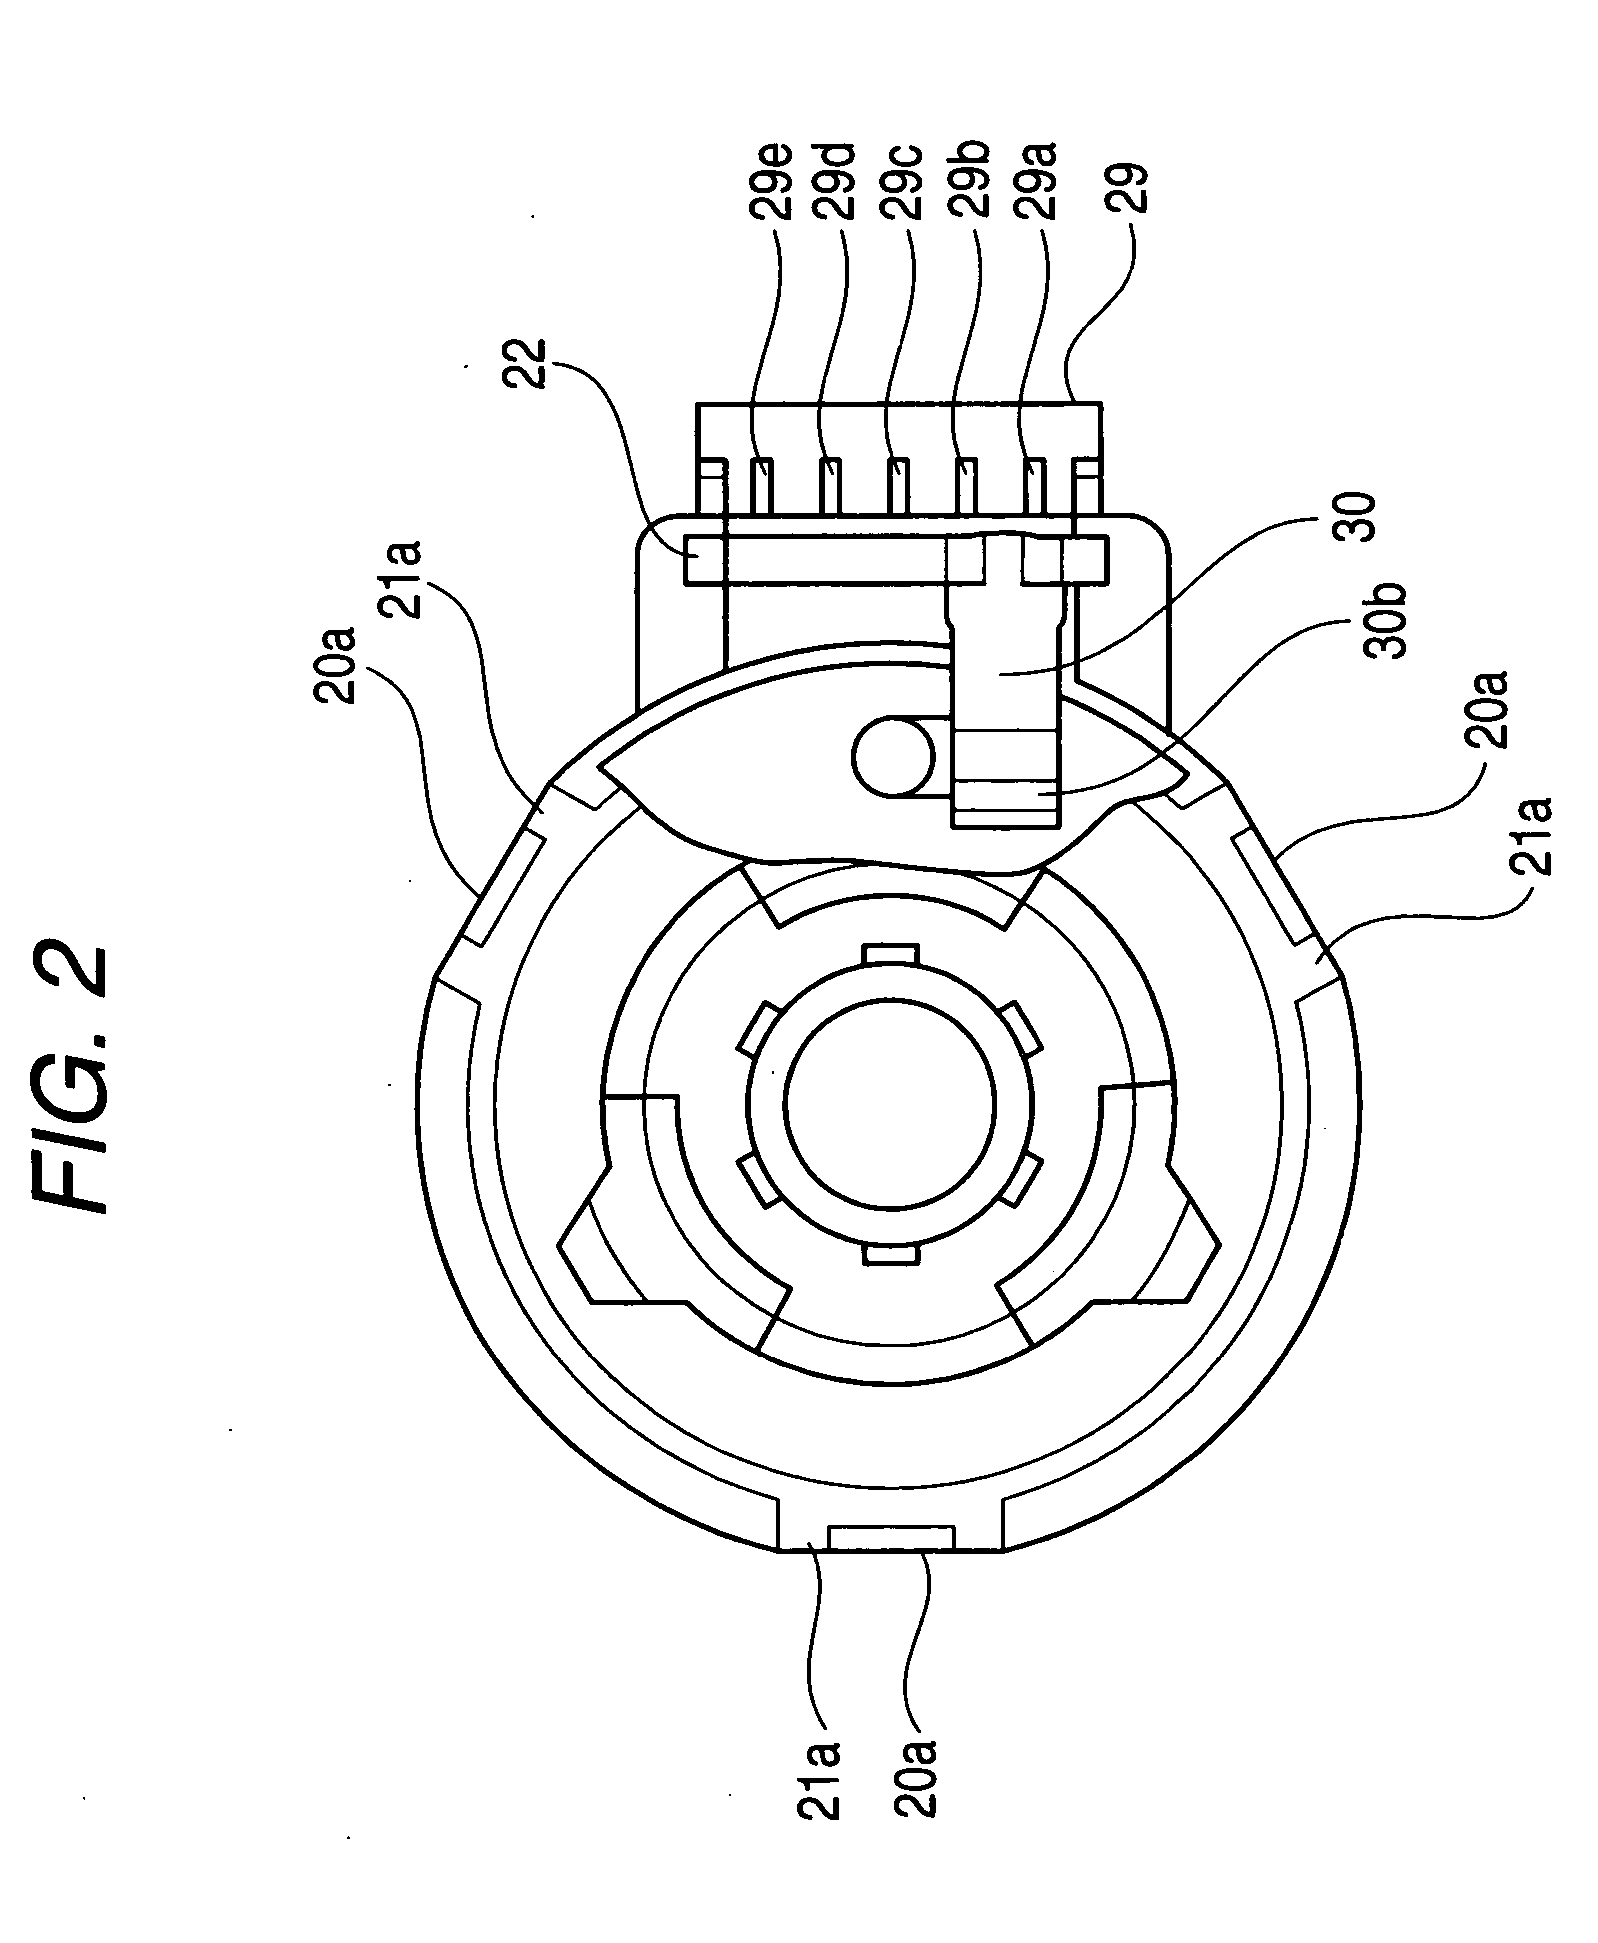 Actuator provided with grounding terminal